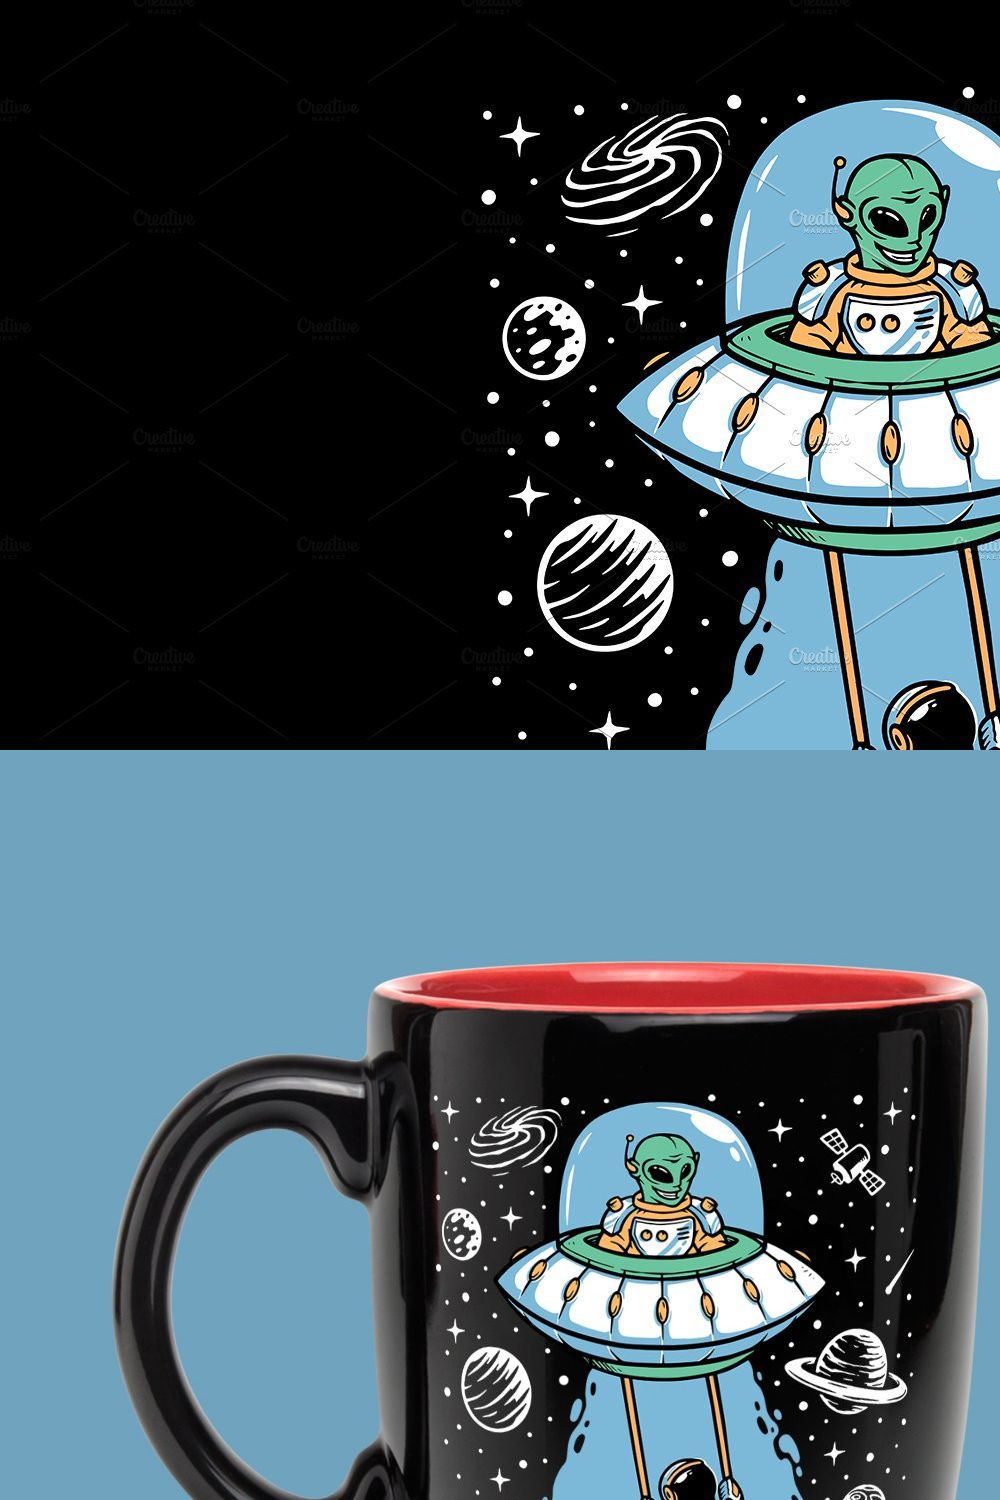 Astronaut and alien playing together pinterest preview image.